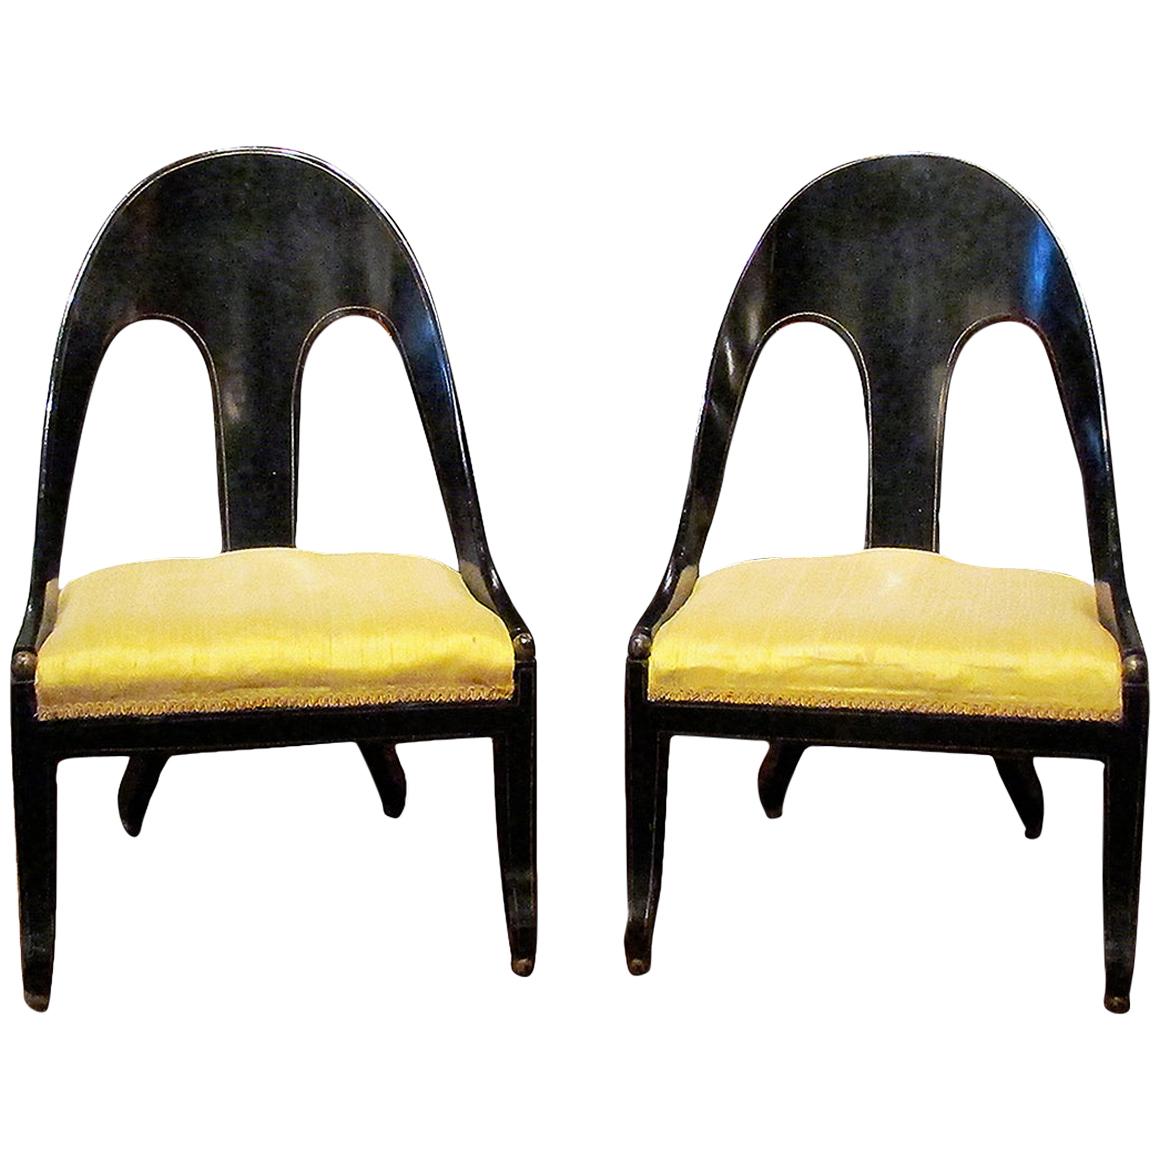 Pair of Early 19th Century Regency Ebonized and Gilt Spoon Back Slipper Chairs